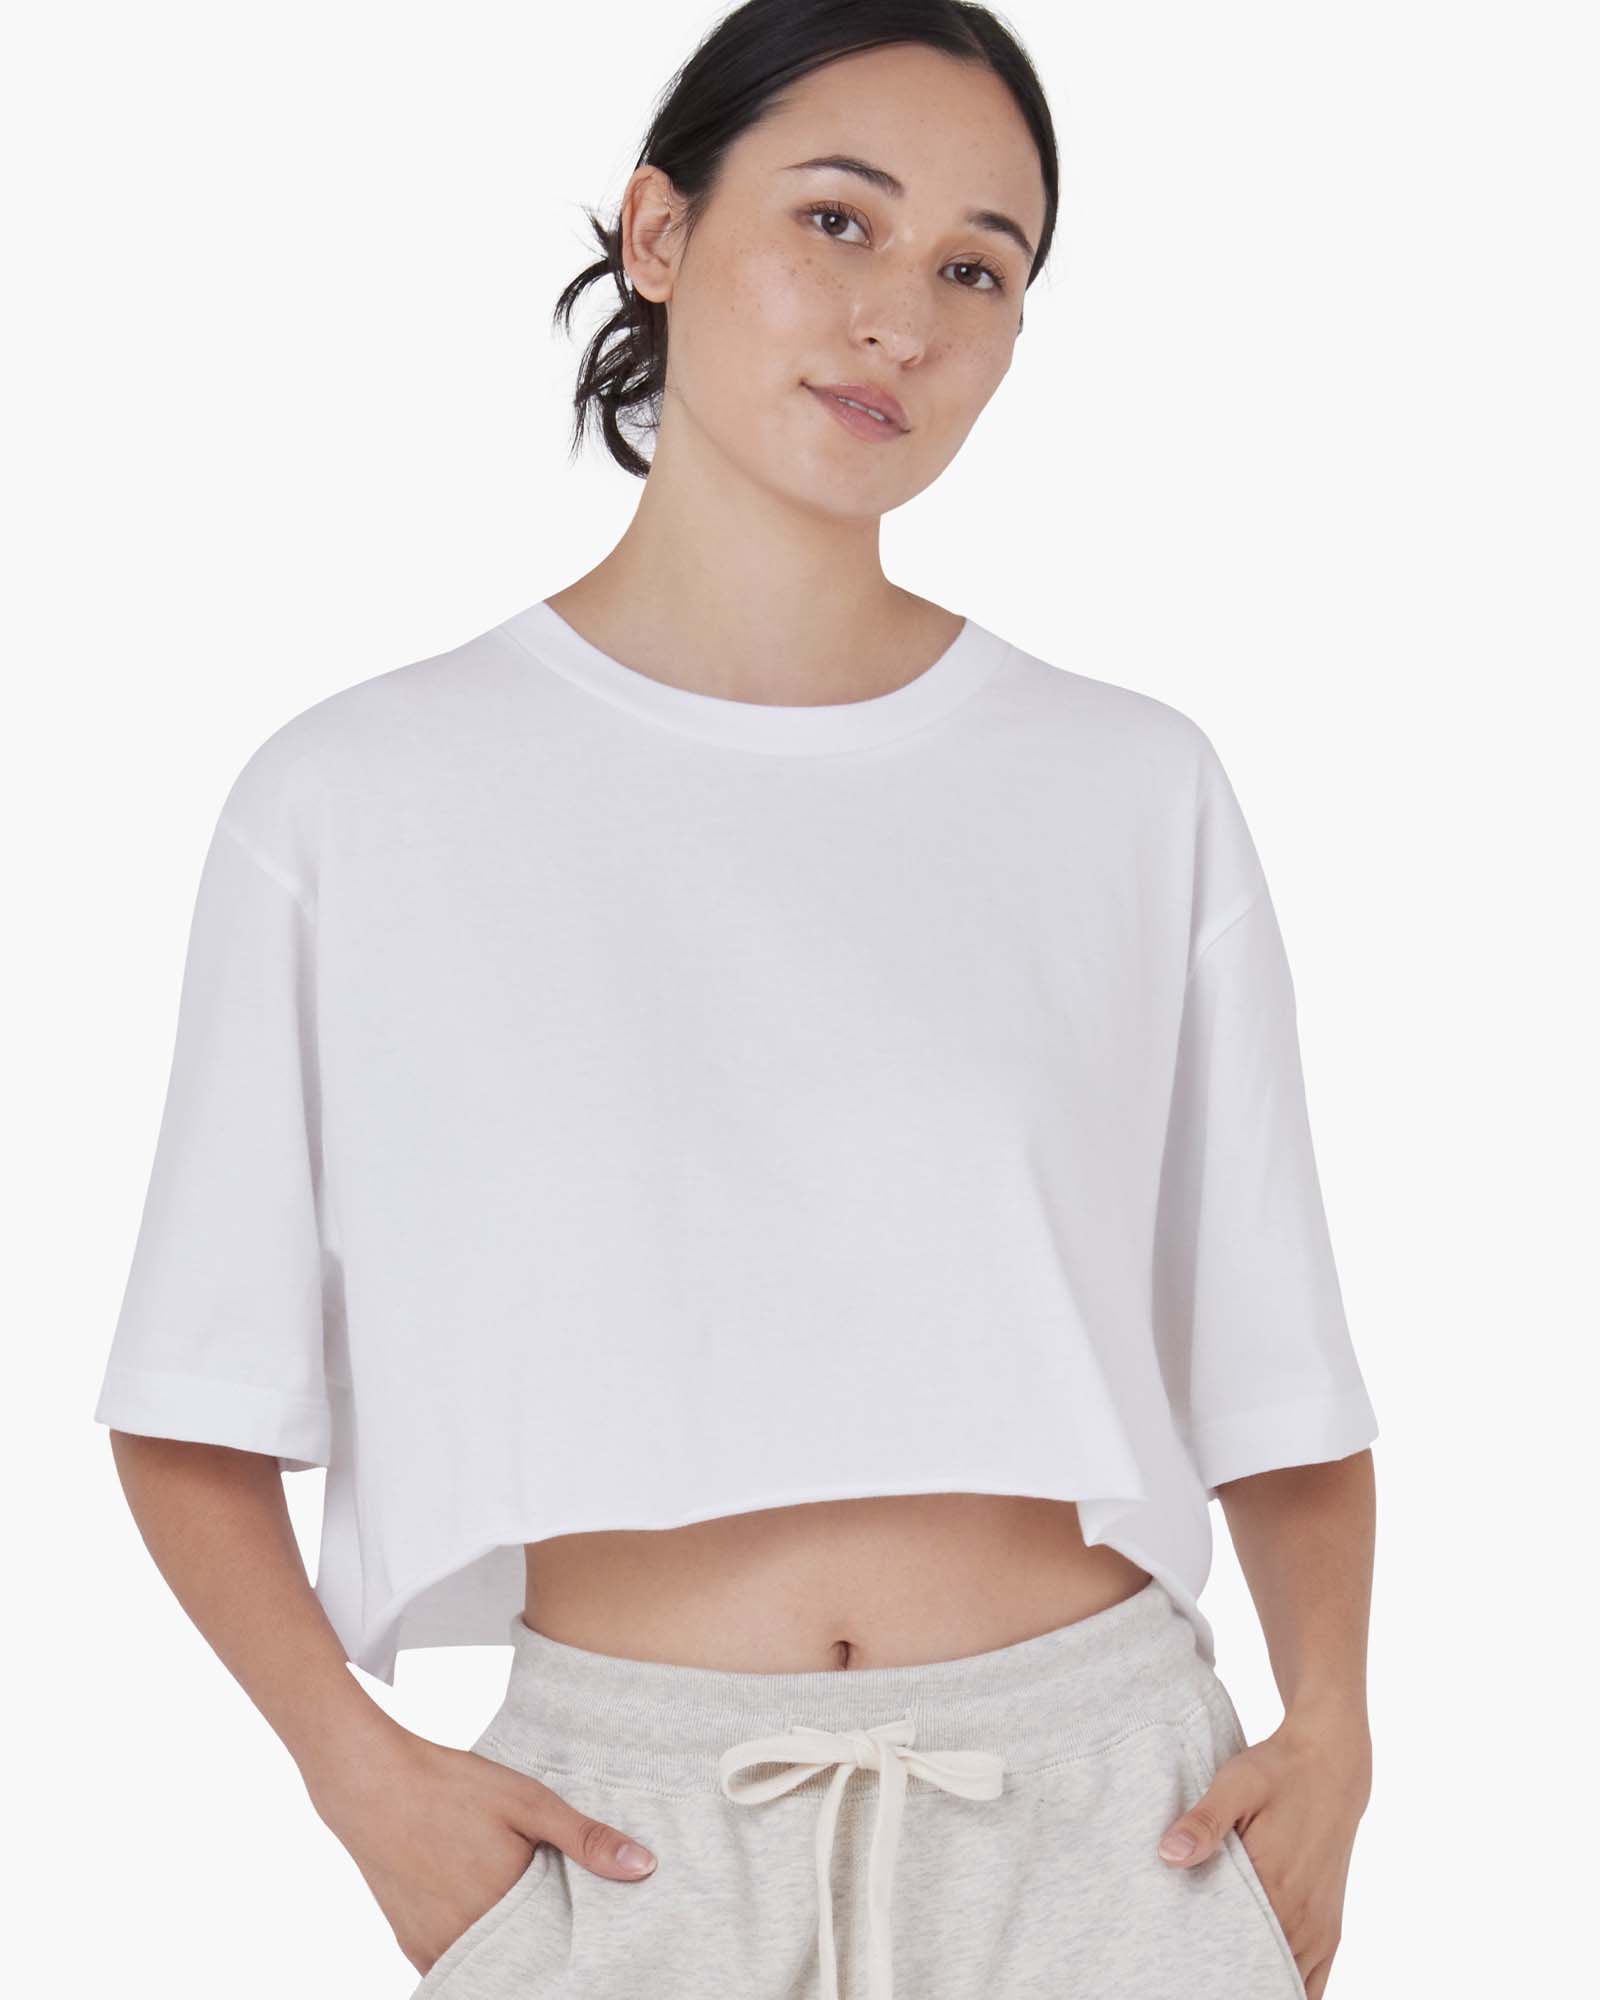 Cropped Tee in White | T-Shirts | Women\'s Clothing – TKEES